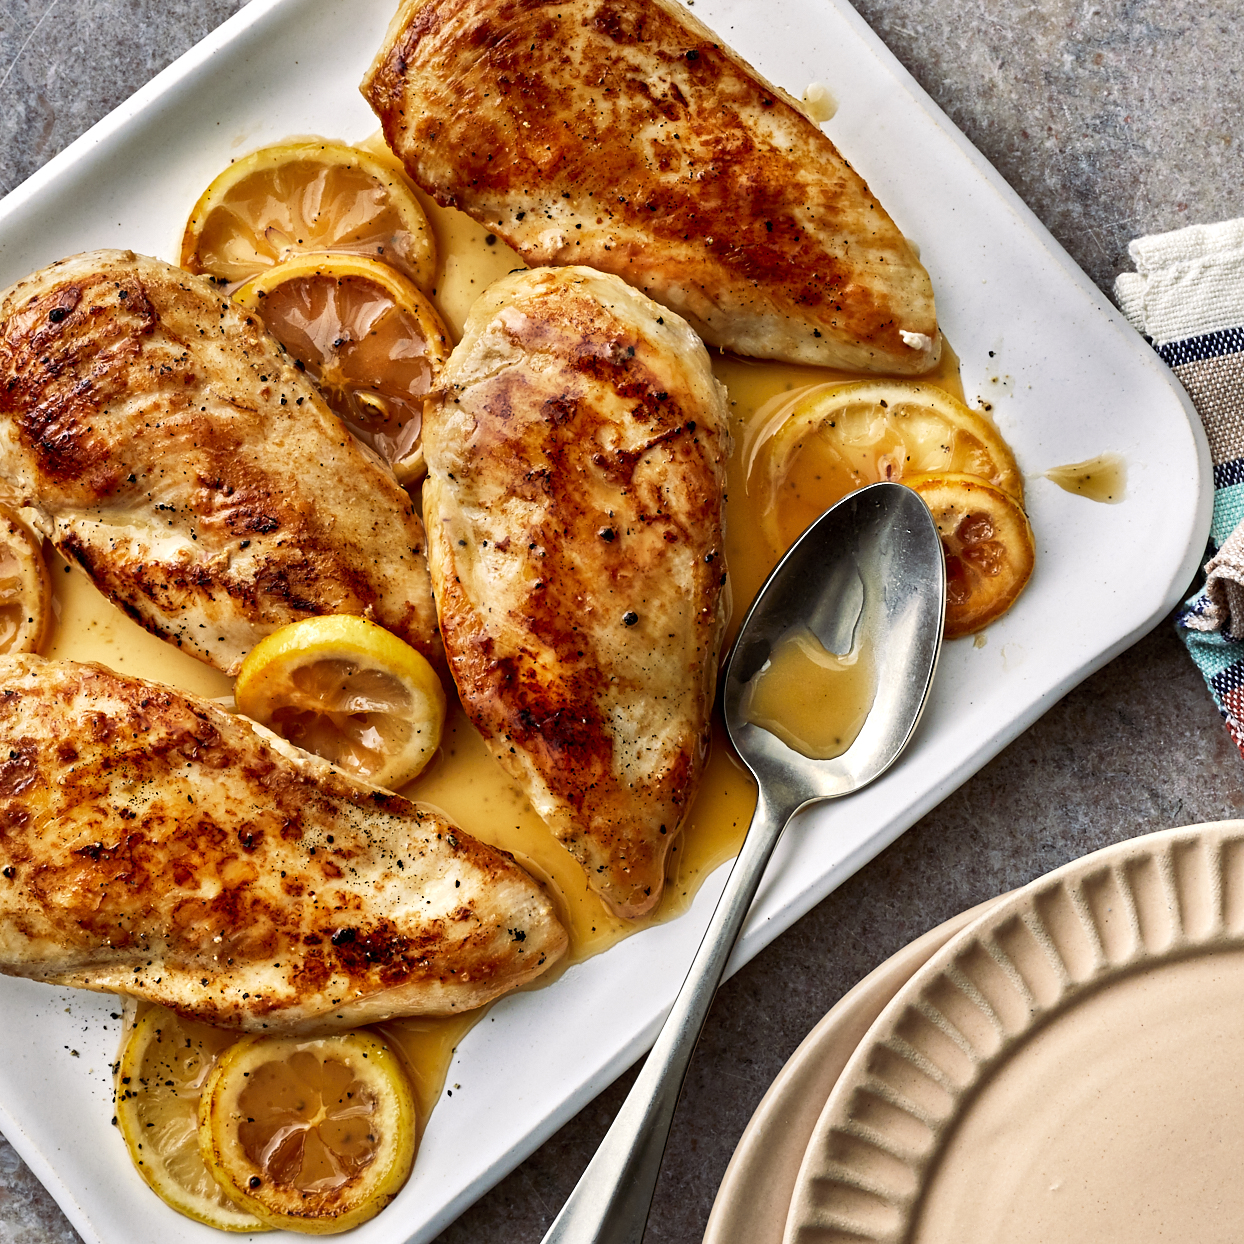 <p>Looking for a quick, easy dinner? This baked lemon-pepper chicken recipe is it. Chicken breasts are cooked in a skillet, then finished in the oven with lemon slices that soften and become part of the sauce, with a touch of maple syrup and butter to carry the flavor. It's so simple and delicious, you'll be making this healthy dinner again and again.</p>
                          